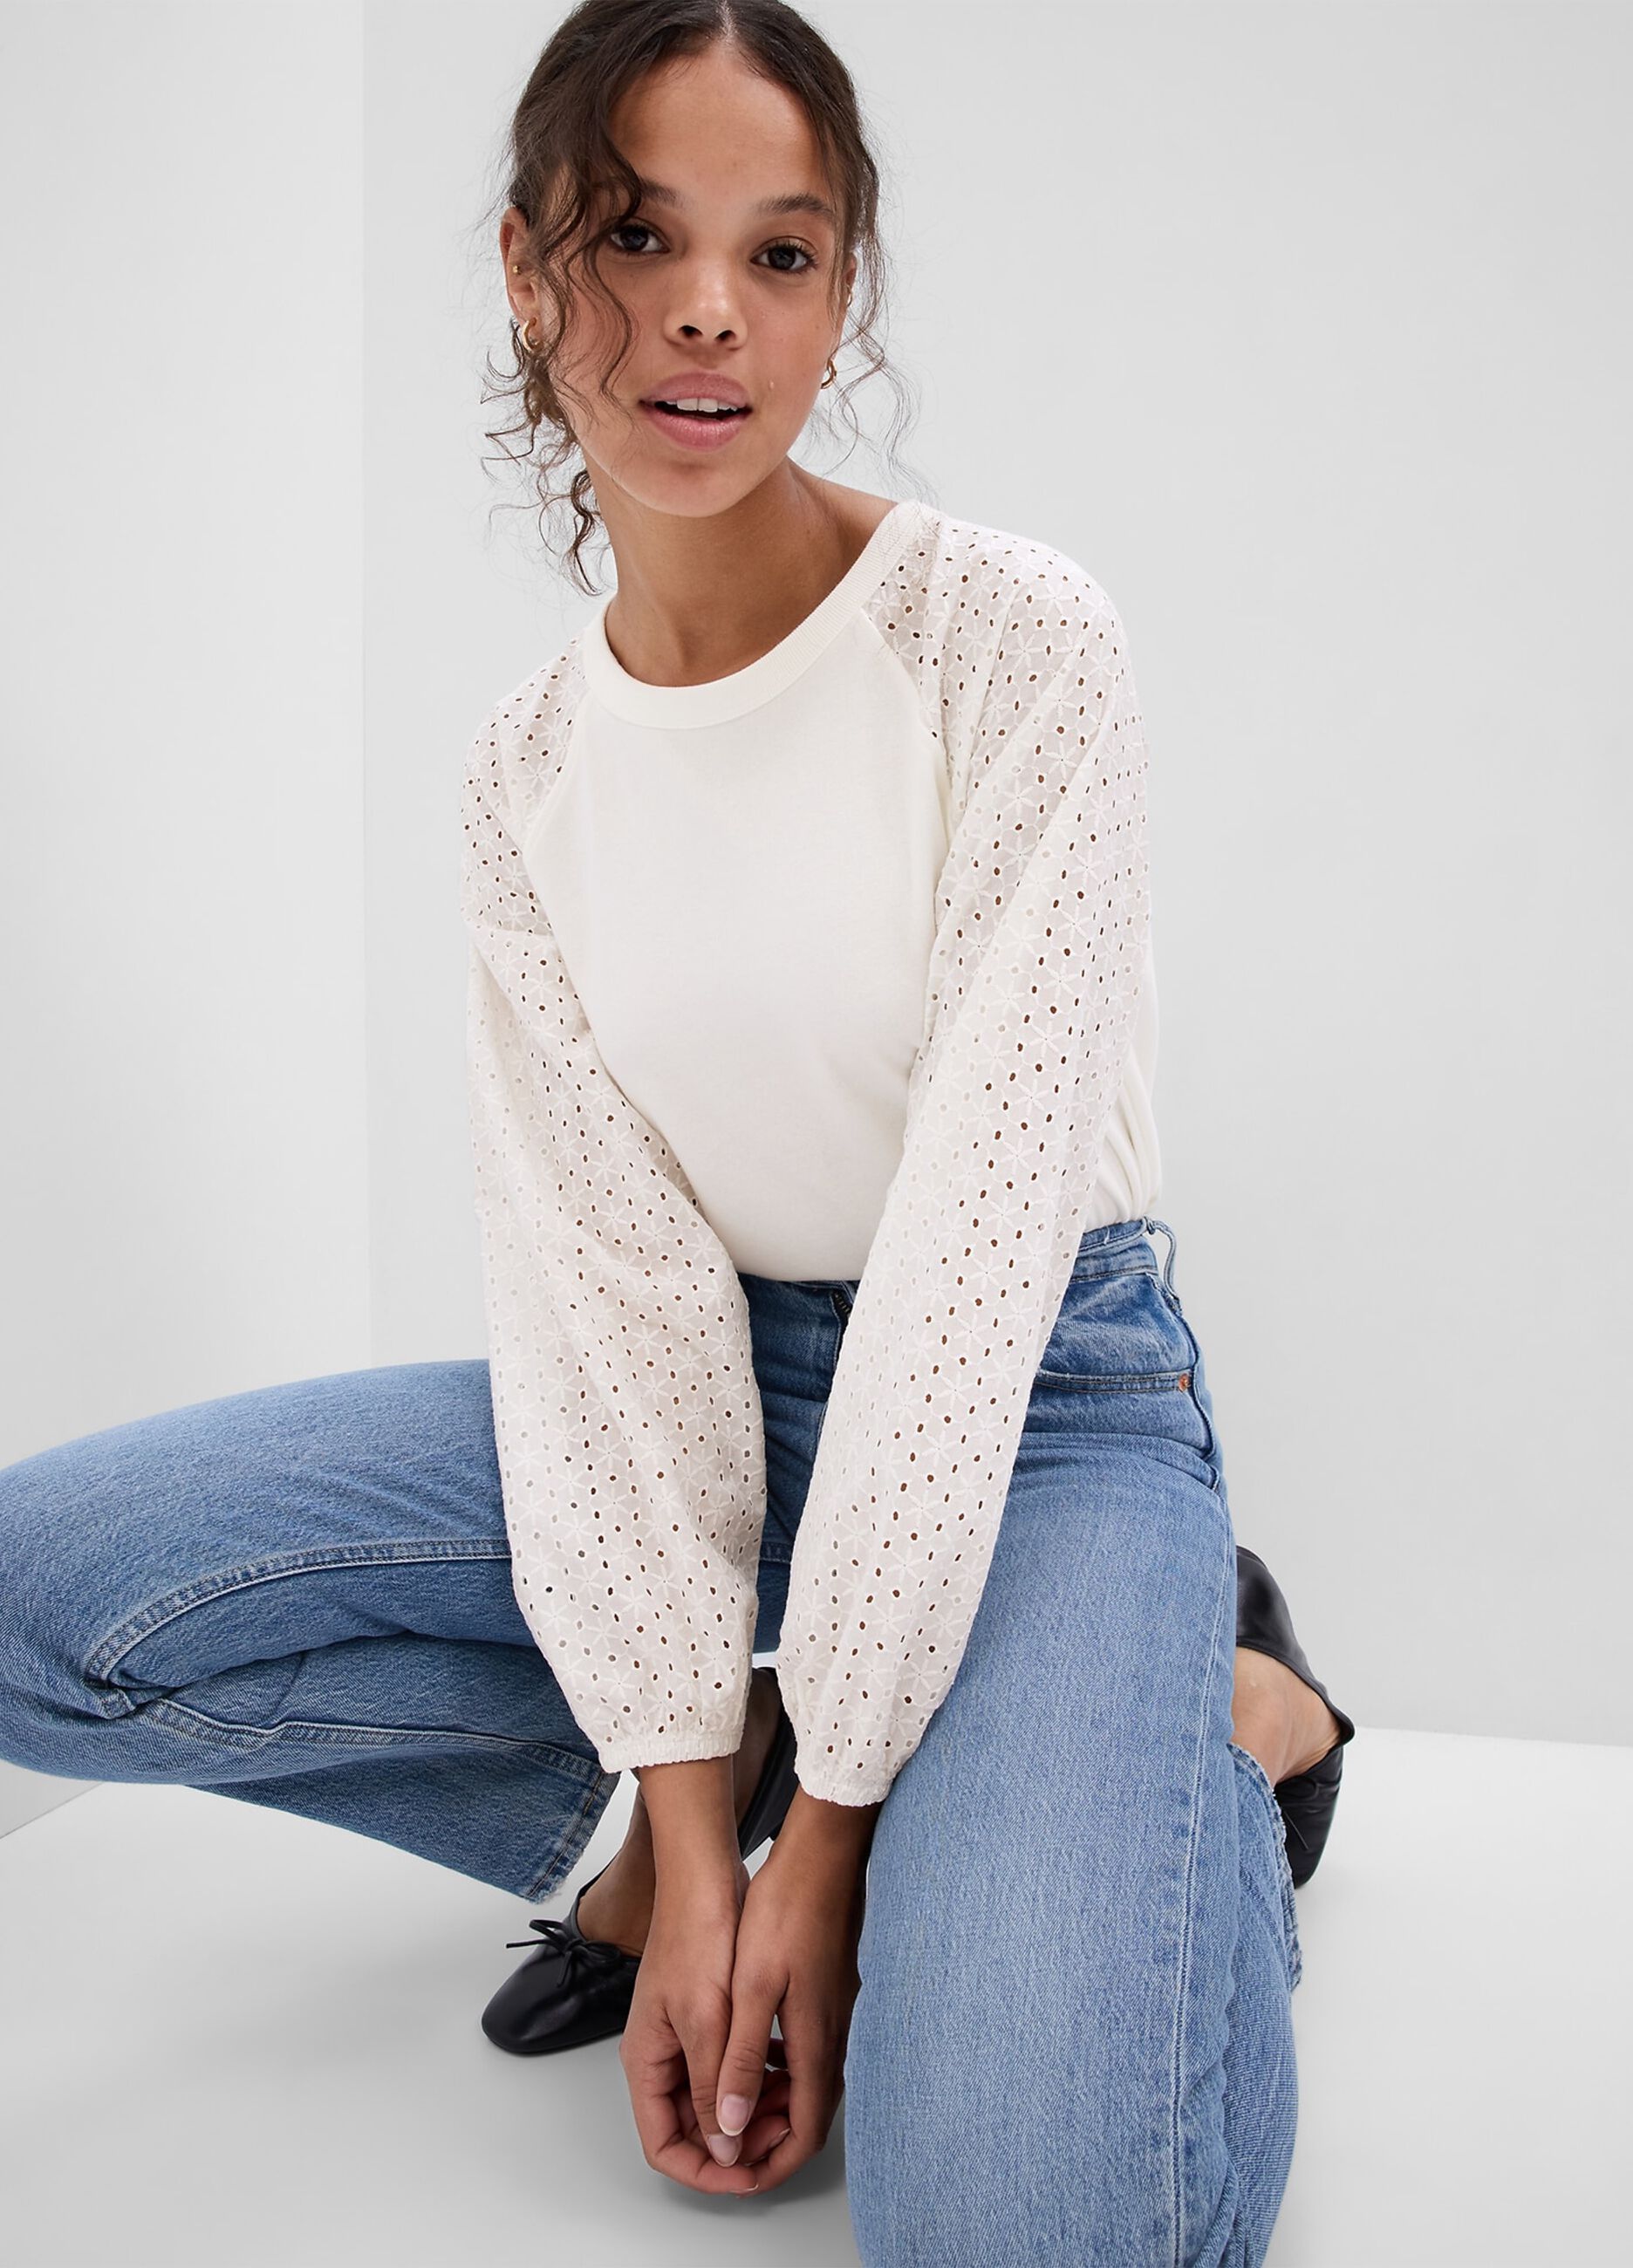 Sweatshirt with broderie anglaise lace sleeves